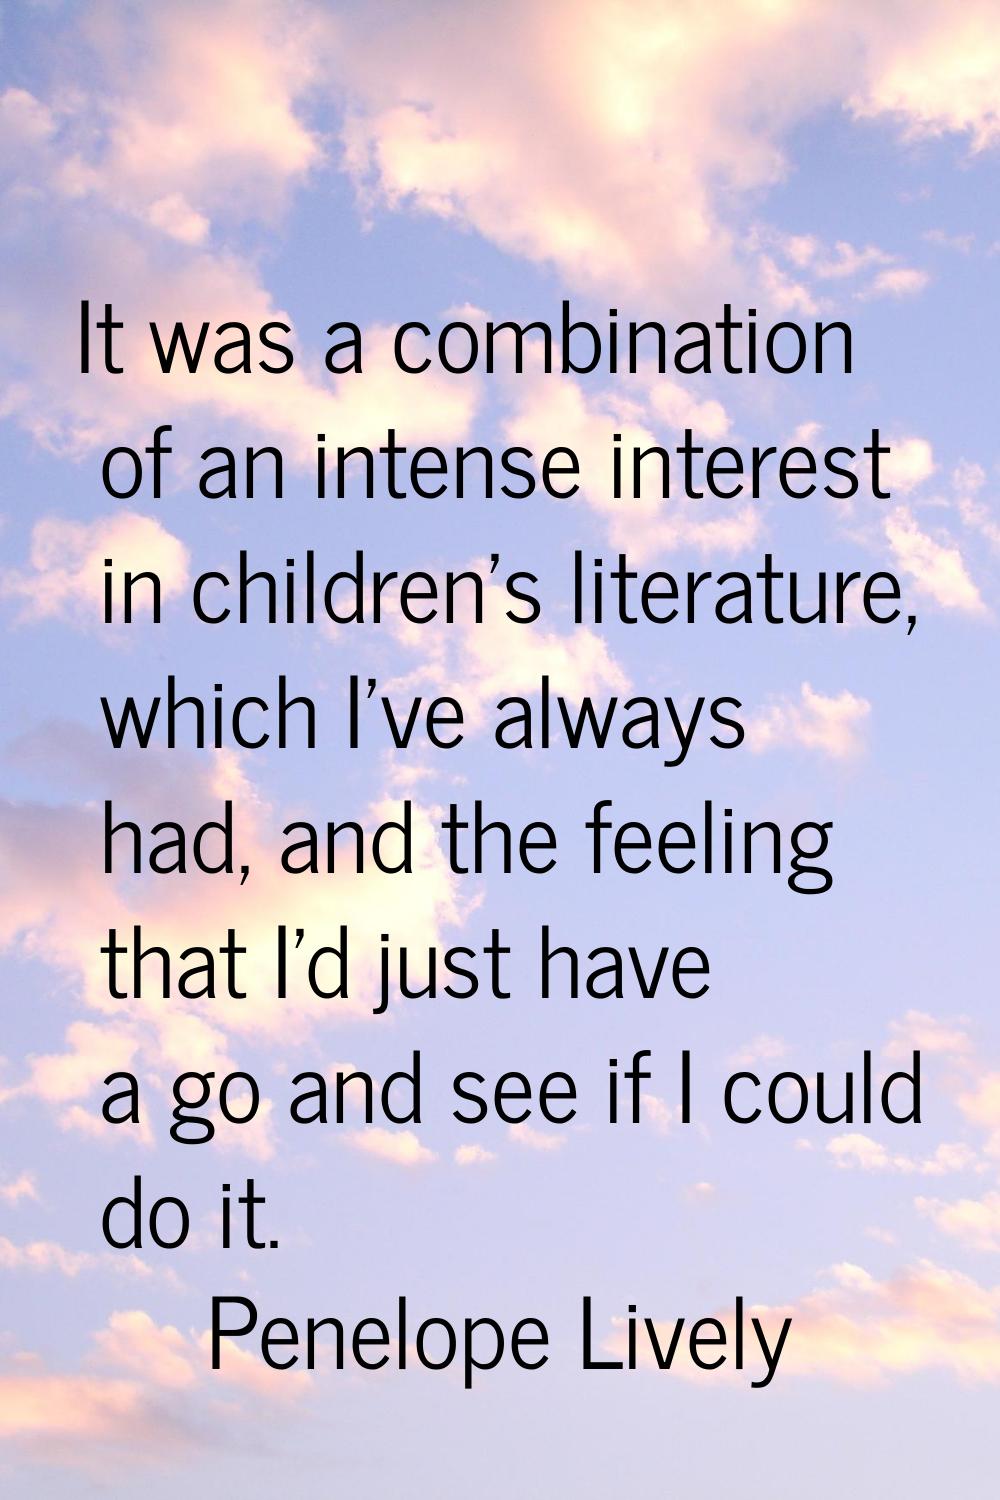 It was a combination of an intense interest in children's literature, which I've always had, and th